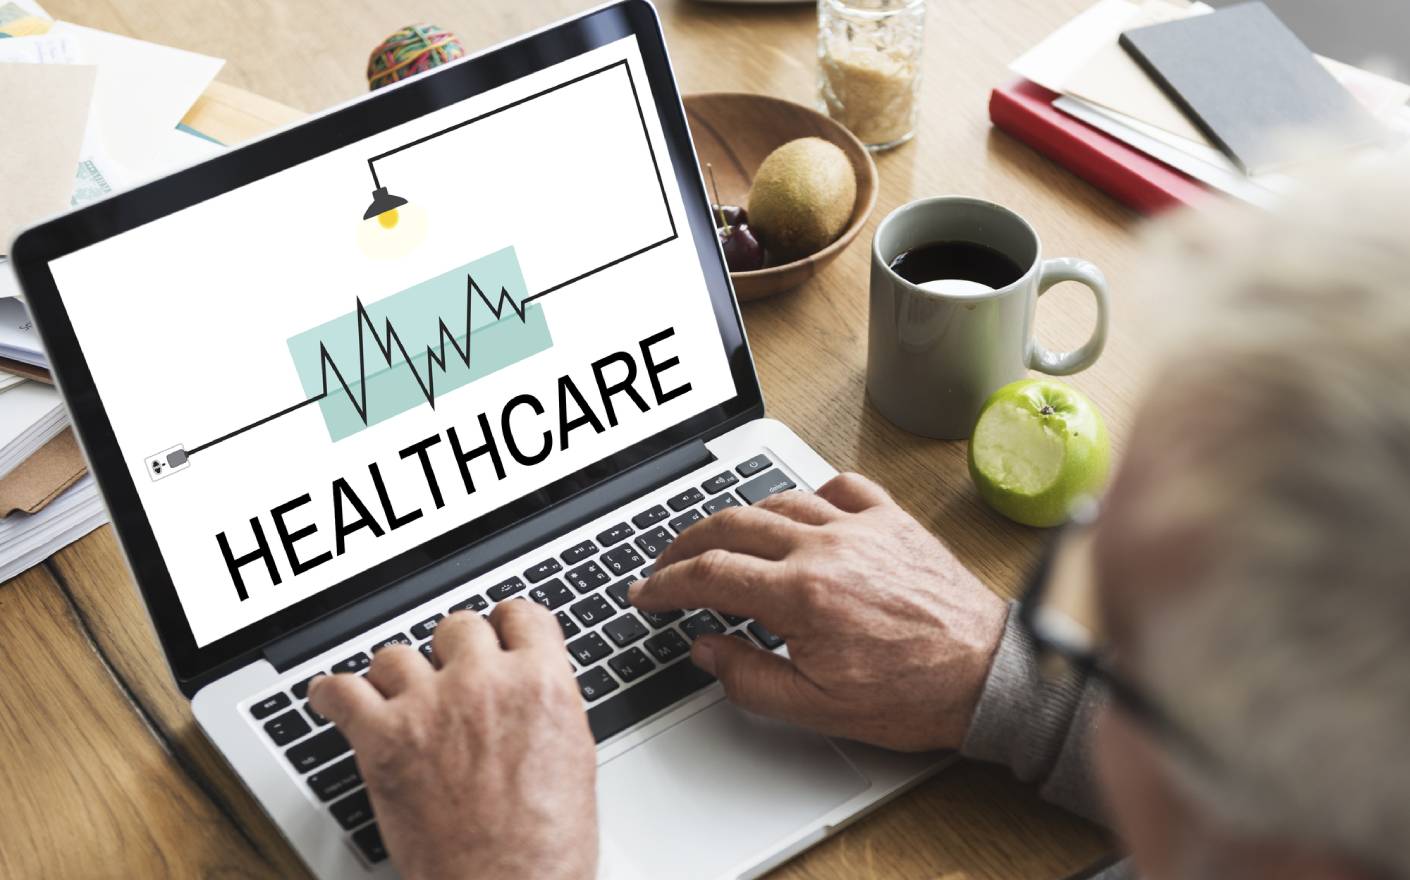 Digital Marketing for Healthcare: Benefits of Hiring a Professional Agency